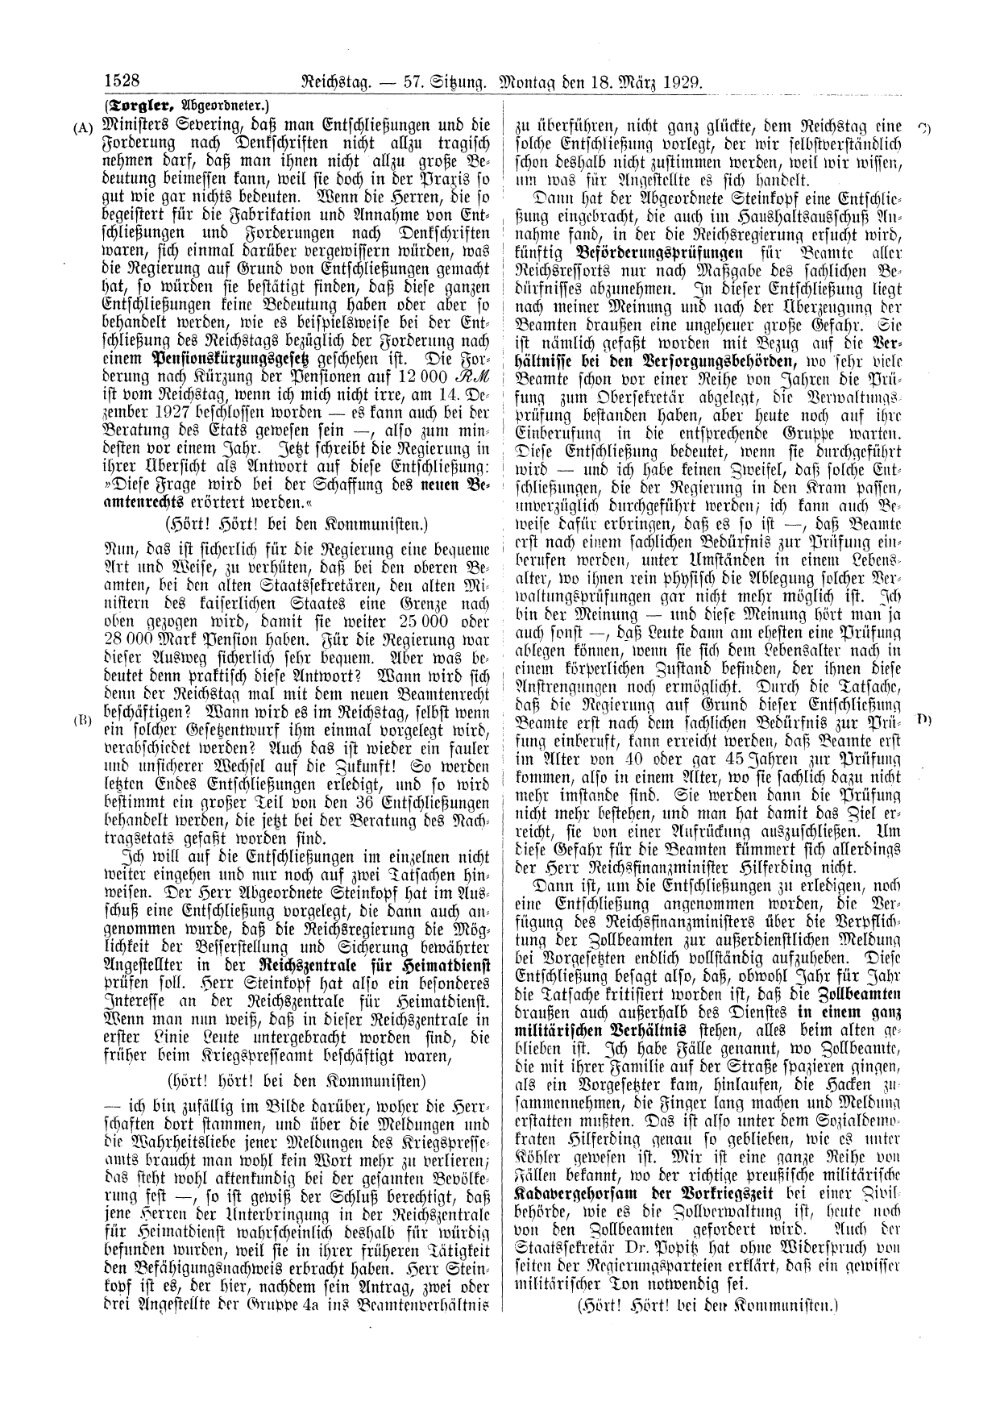 Scan of page 1528